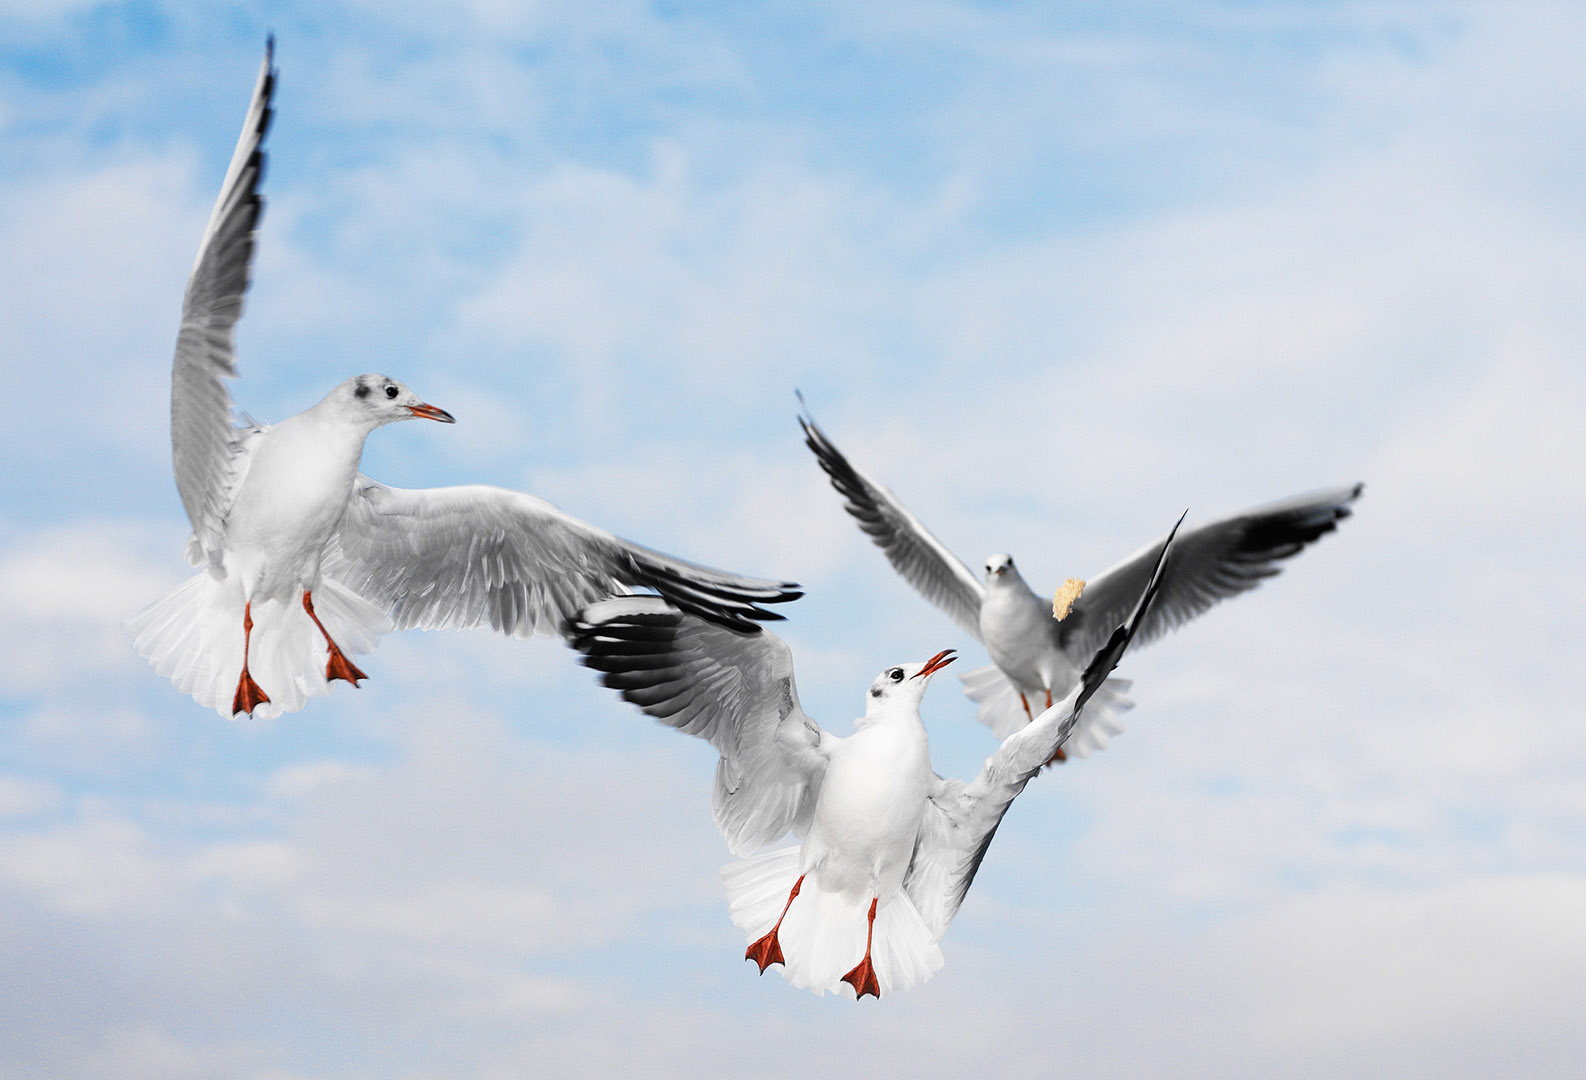 Three Seagulls in mid air looking at bread